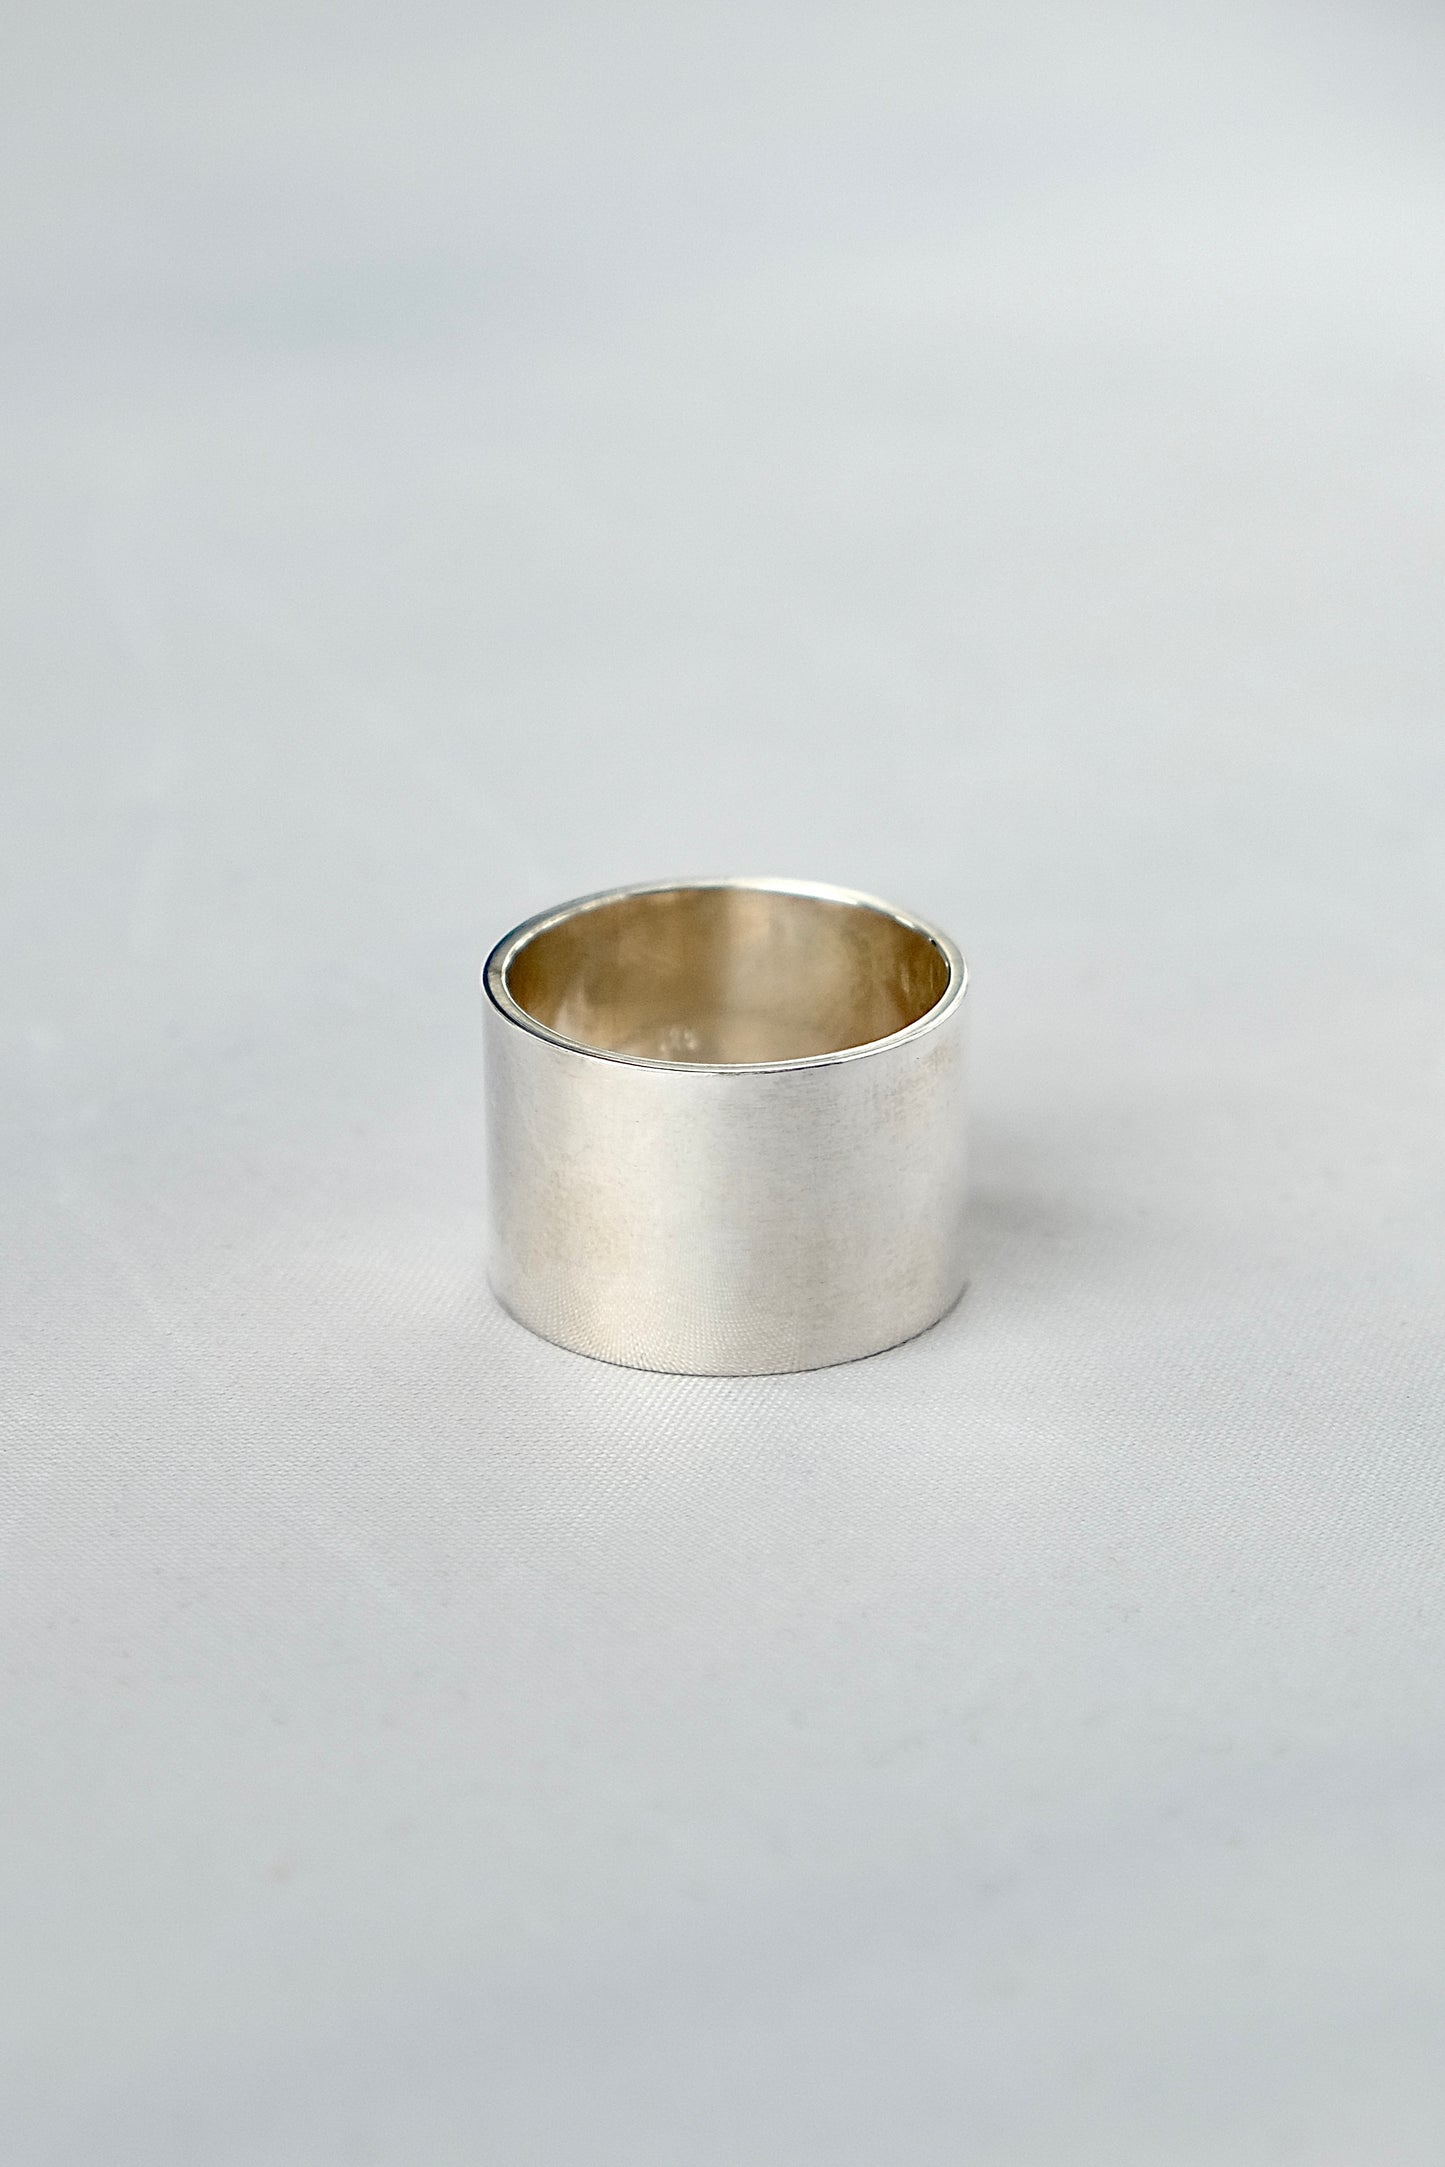 Ring without inscription